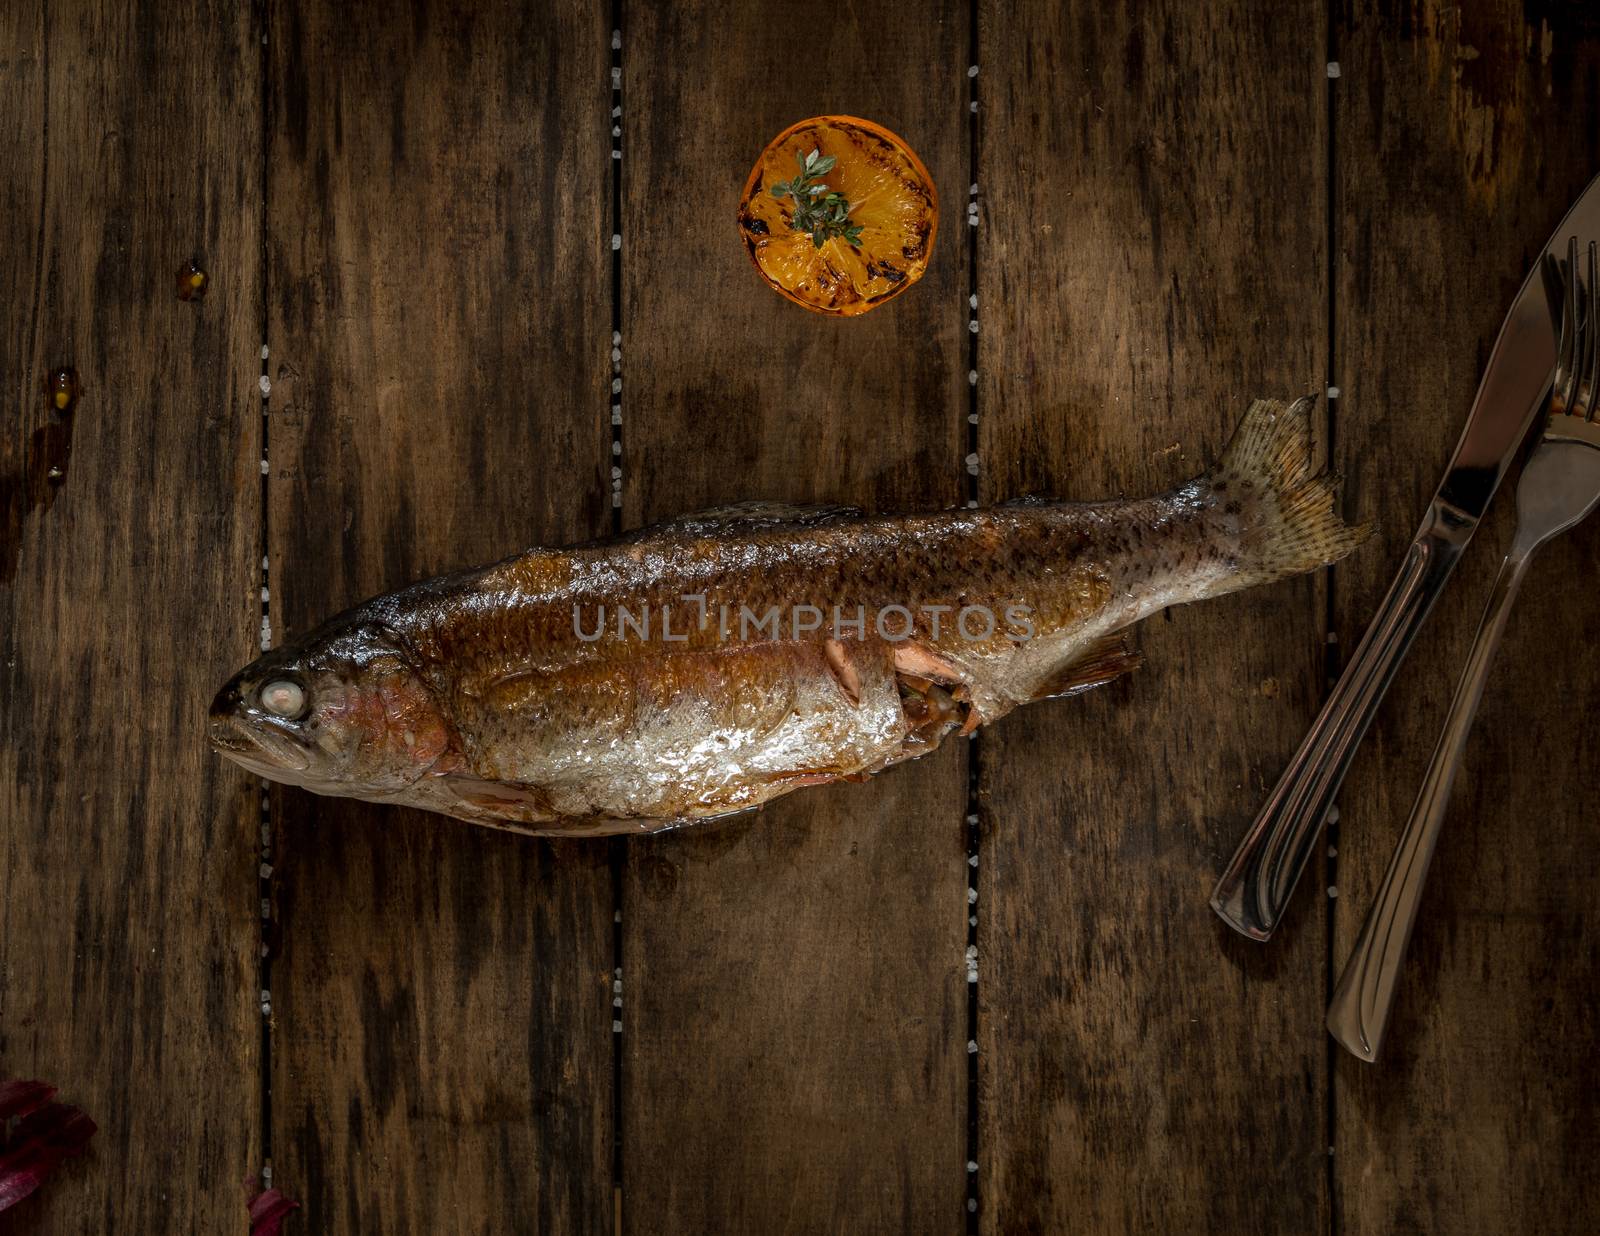 baked fish on wooden boards, top view